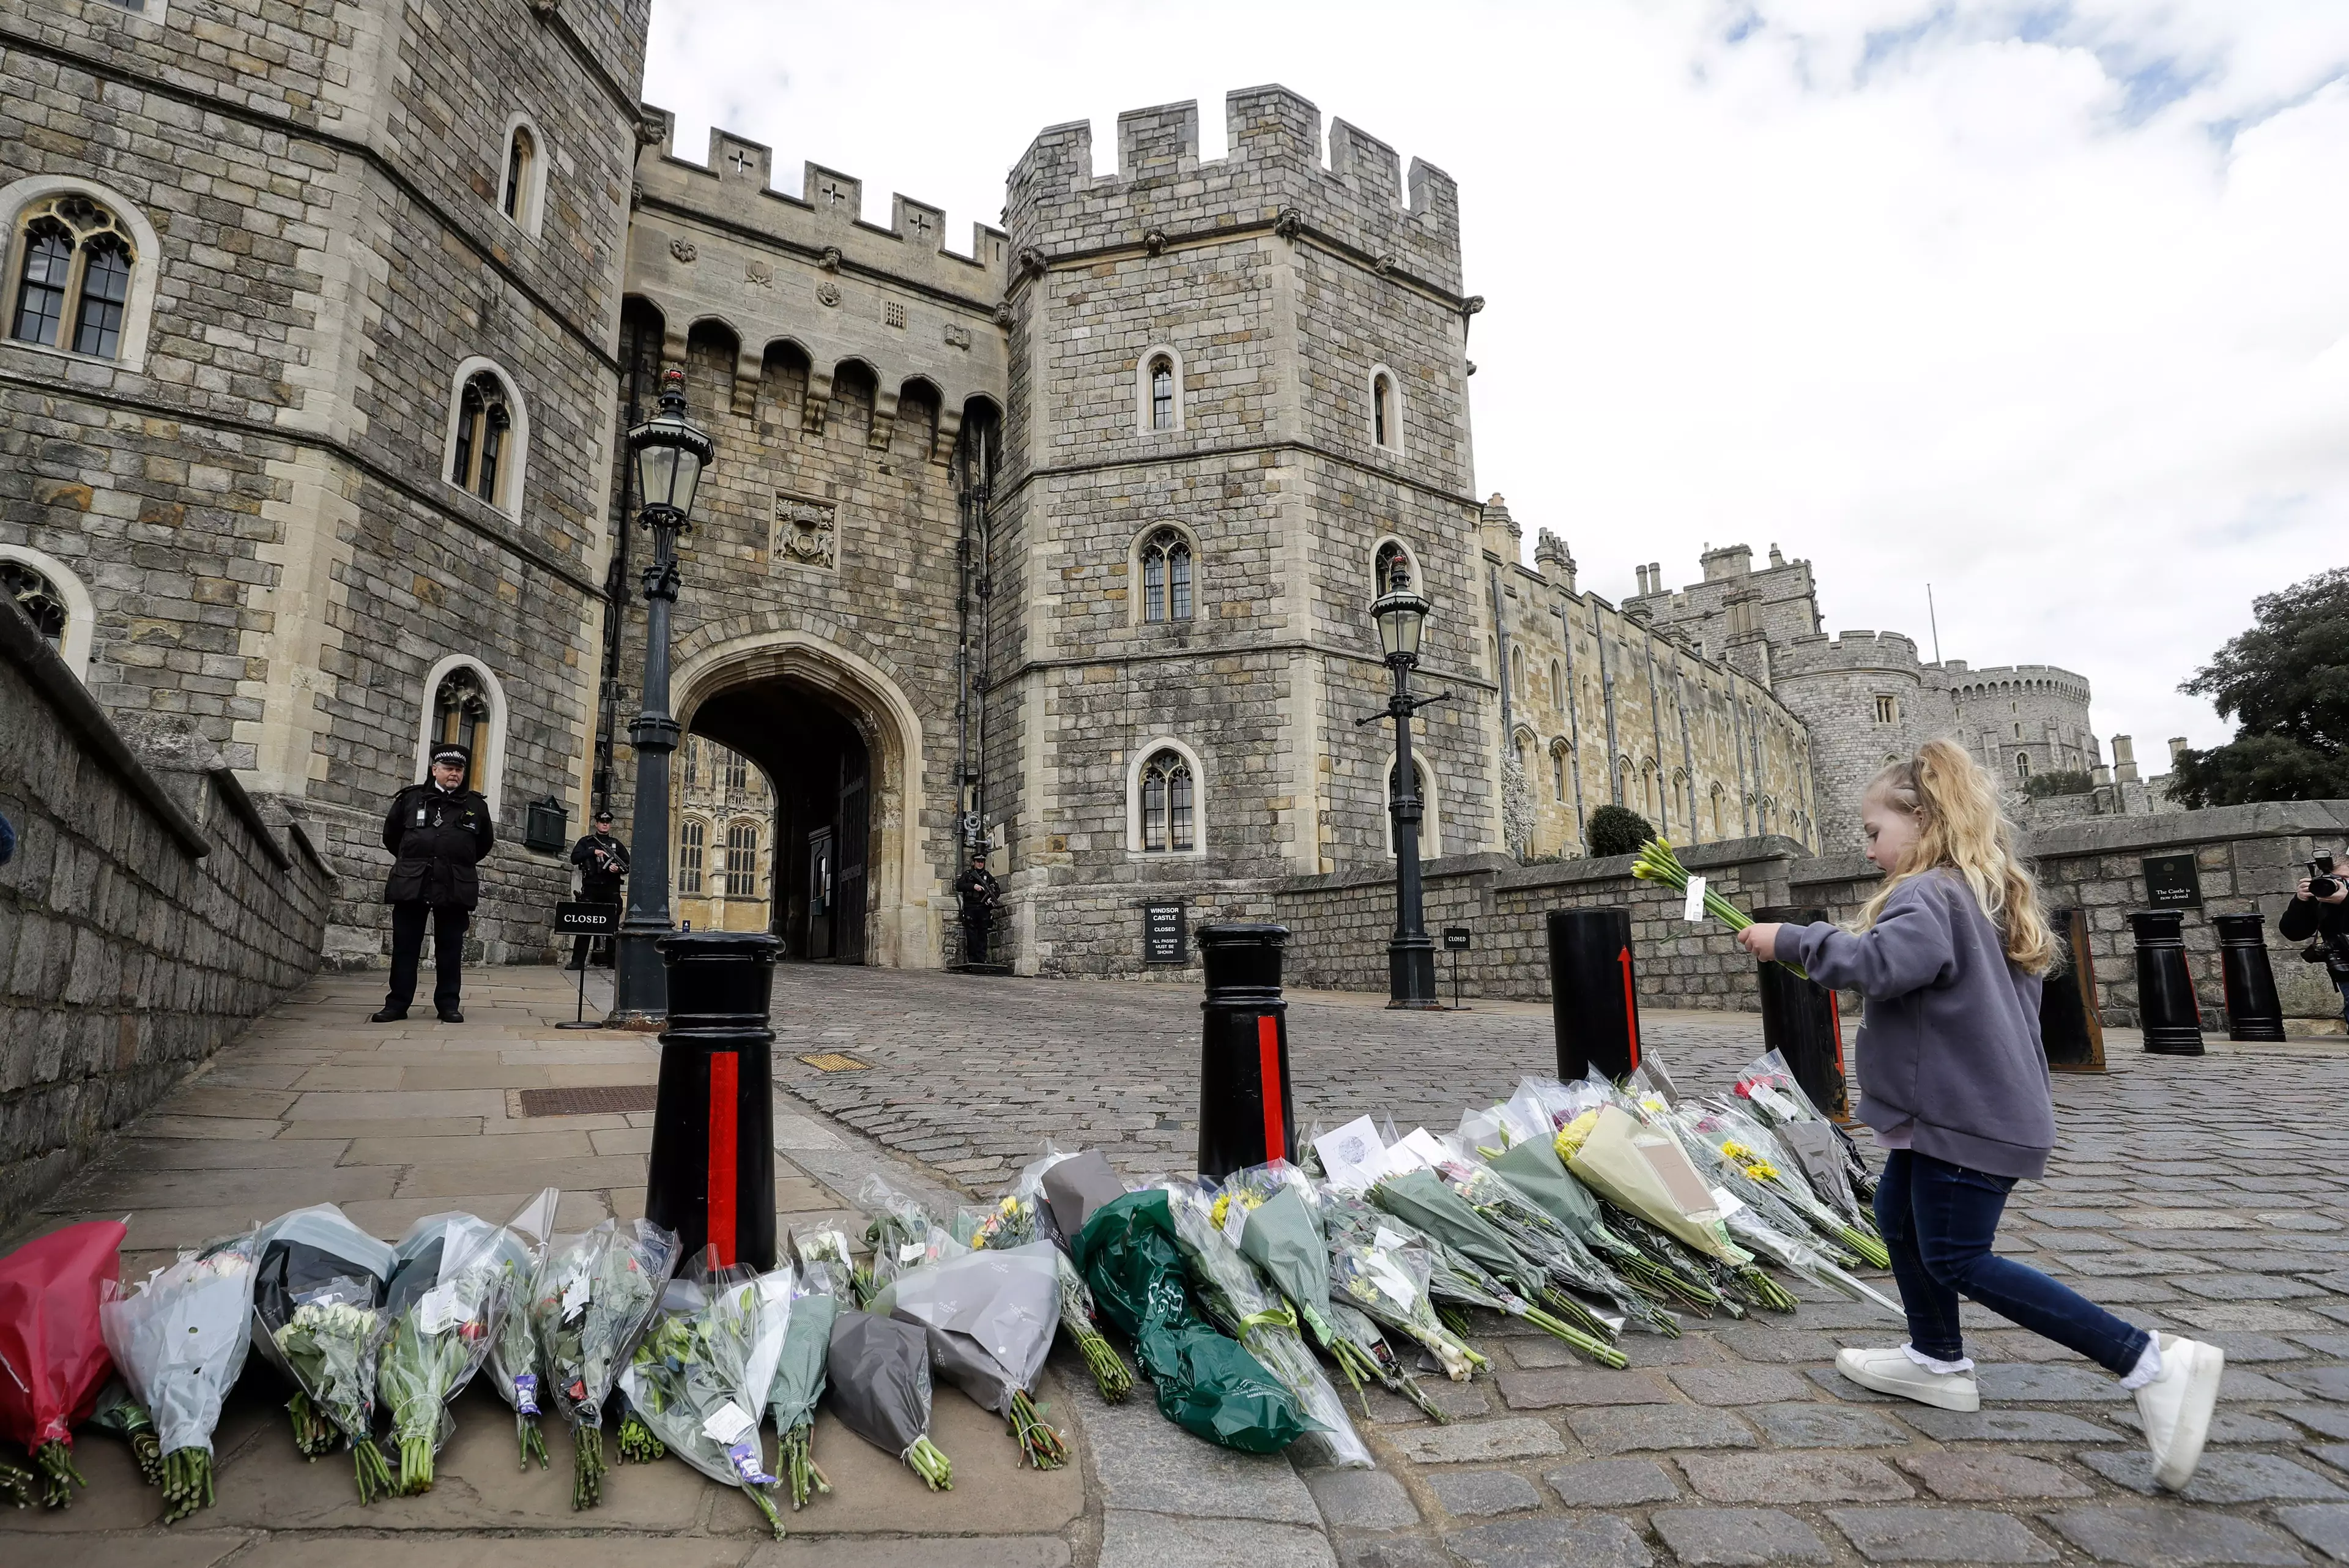 Flowers have been left by the public outside Windsor Castle in tribute to Prince Philip (